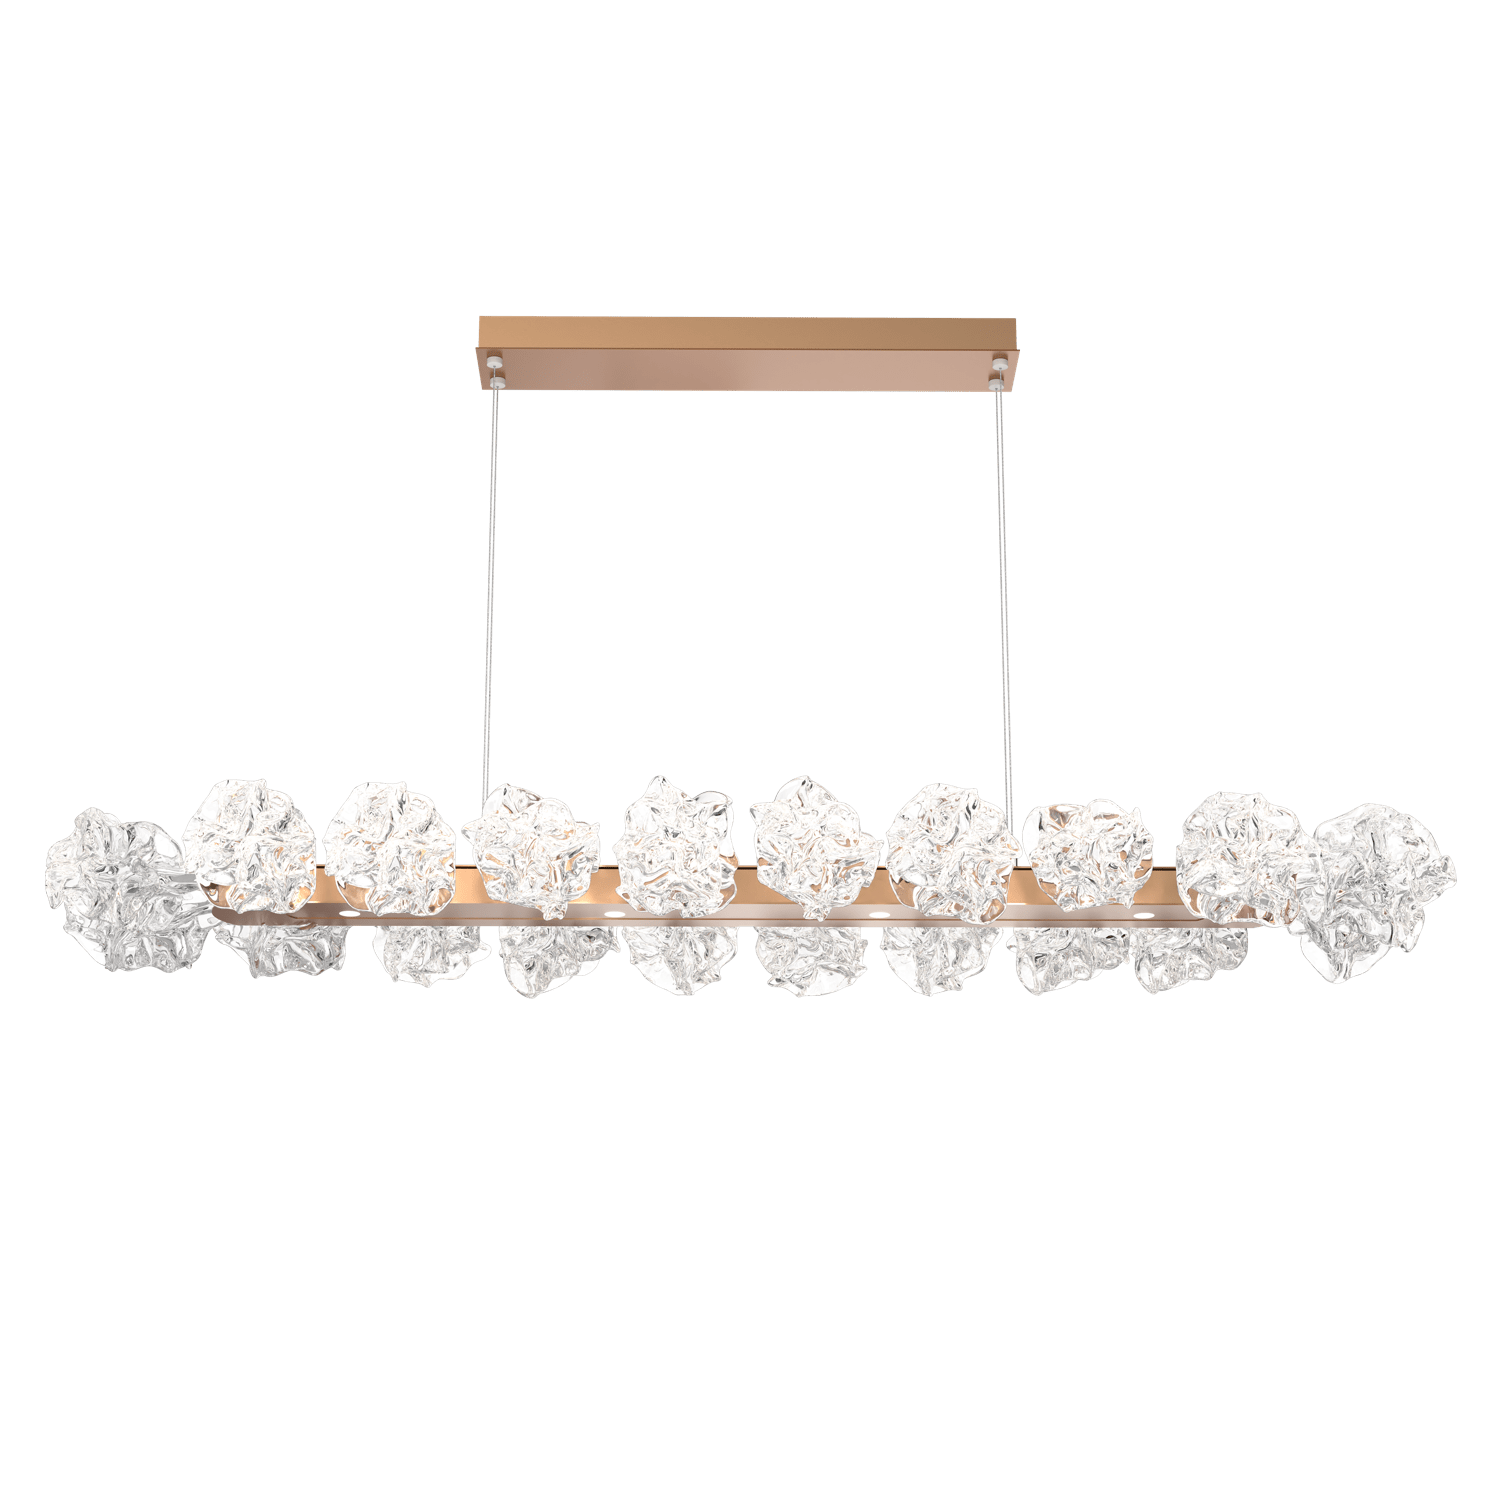 PLB0059-60-NB-Hammerton-Studio-Blossom-60-inch-linear-chandelier-with-novel-brass-finish-and-clear-handblown-crystal-glass-shades-and-LED-lamping